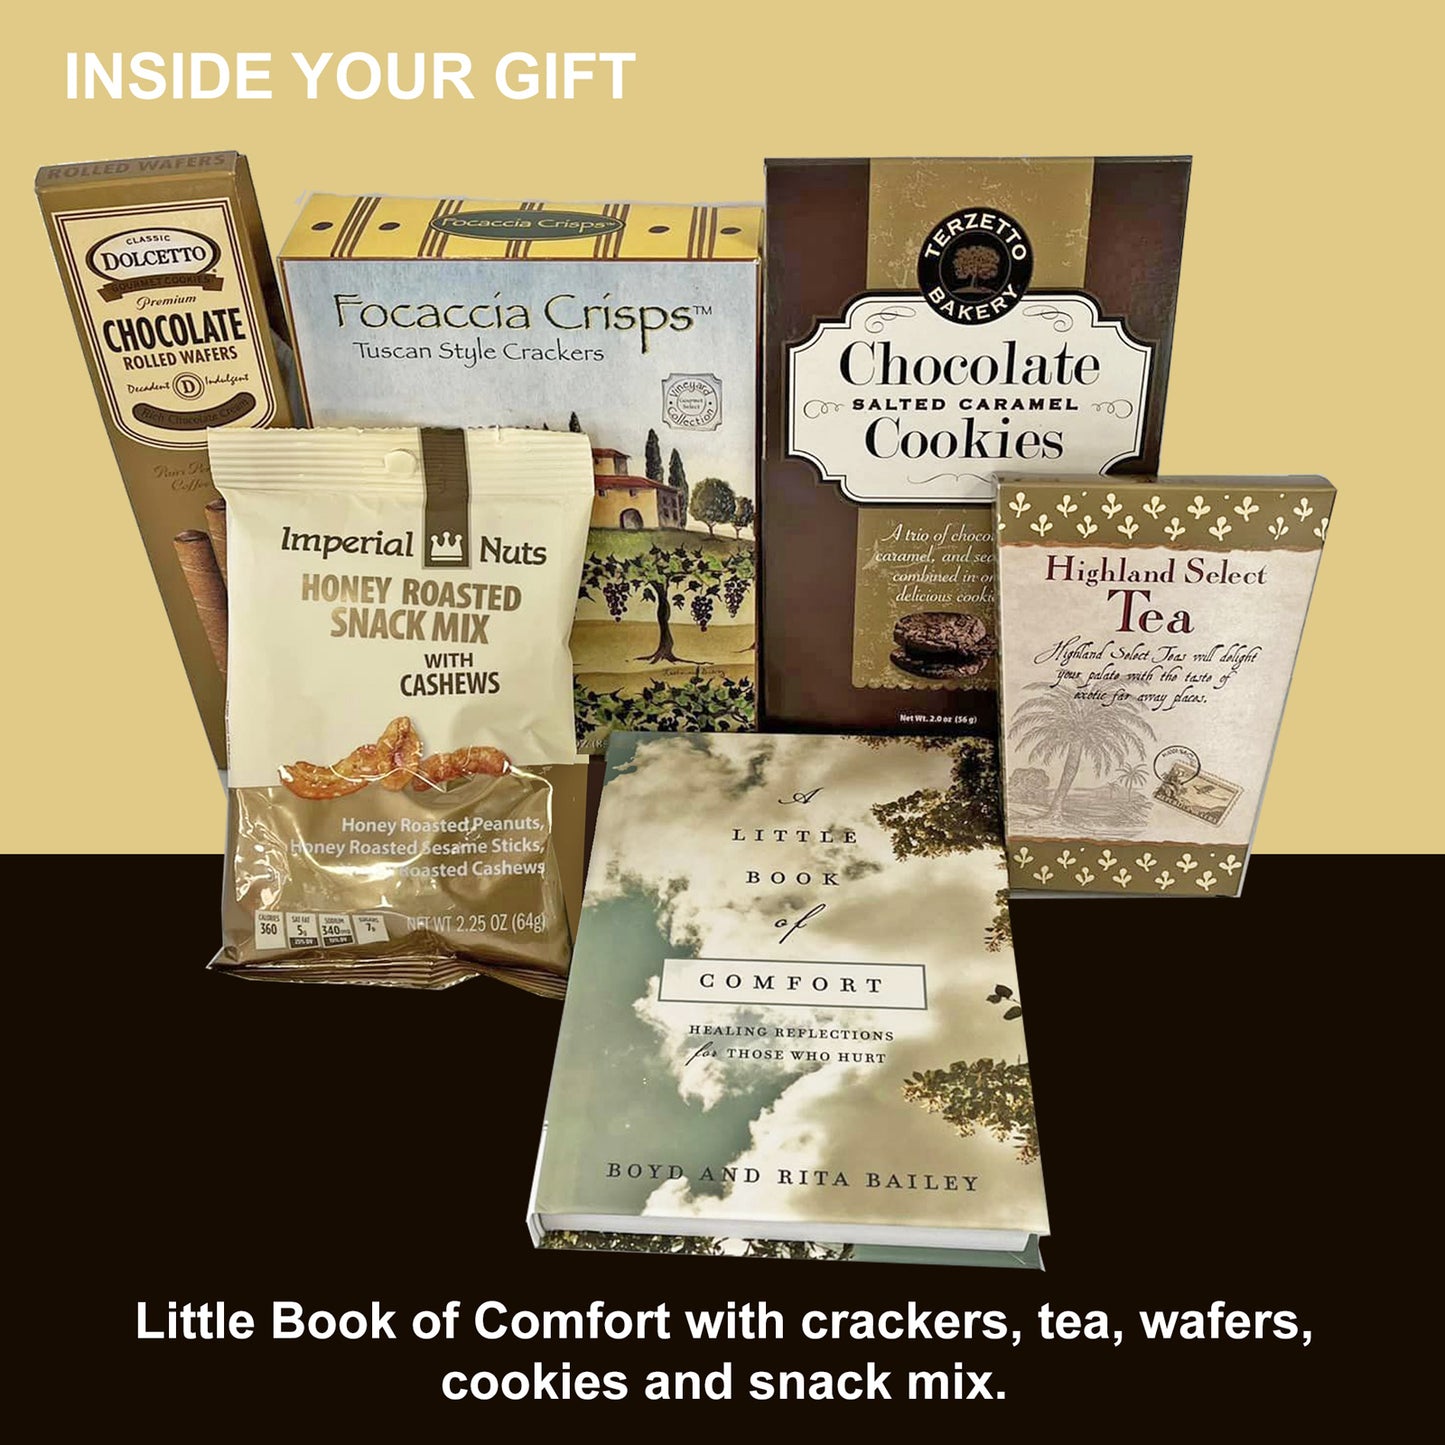 Little Book of Comfort Christian Sympathy Gift Basket for Sending Condolences on the Loss of a Loved One